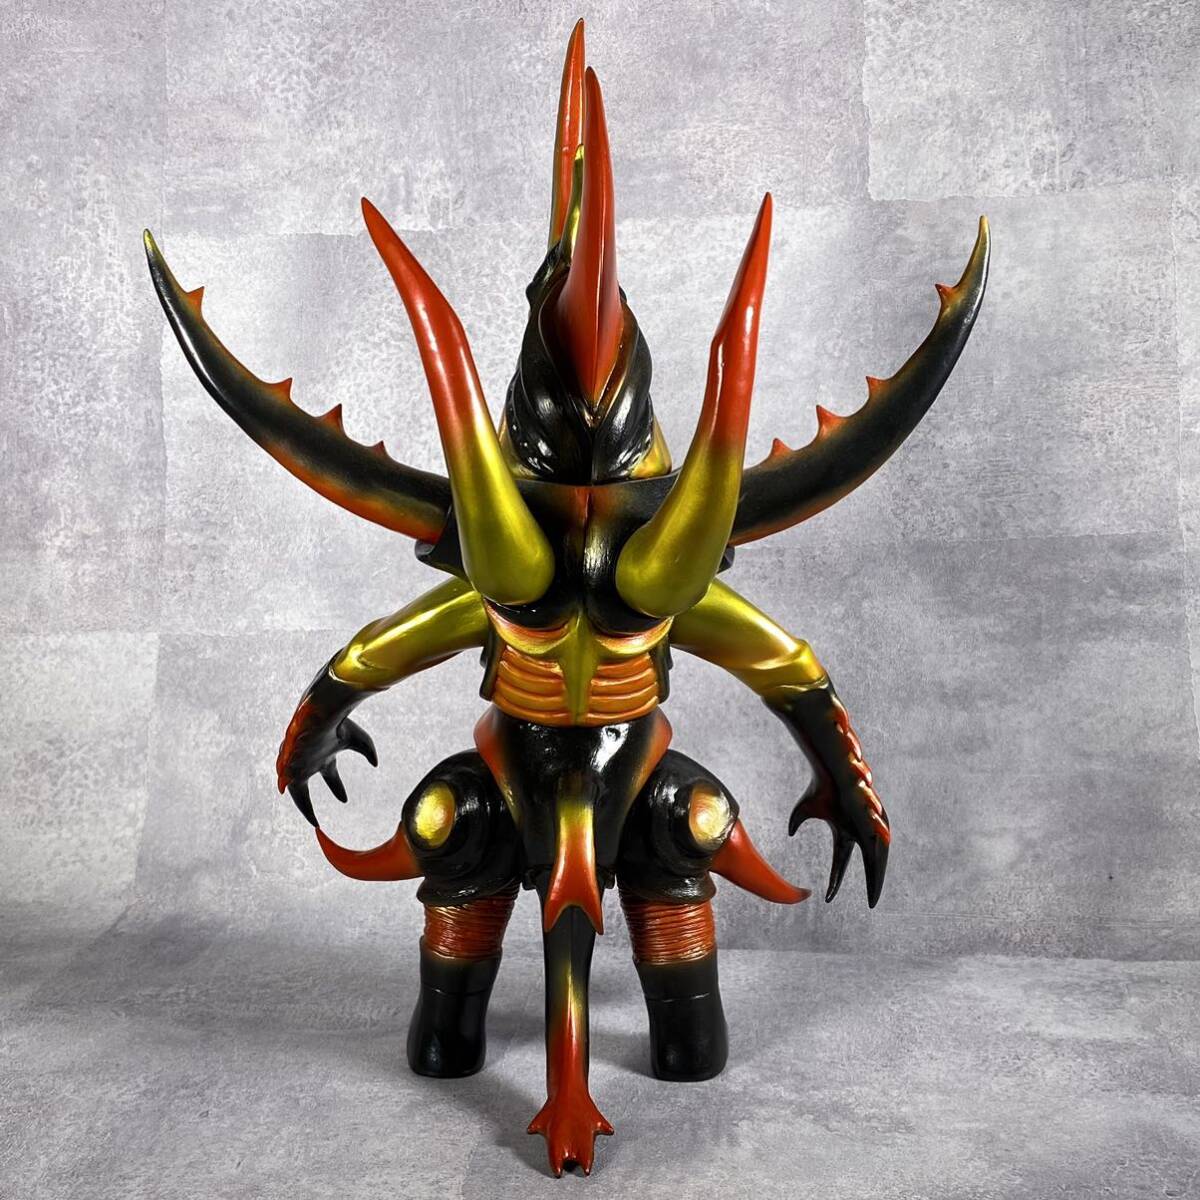  sofvi .. large Kirameki .he rug la-do regular color ver. total height approximately 39cm indies sofvi figure insect monster extraterrestrial .. house atelier 